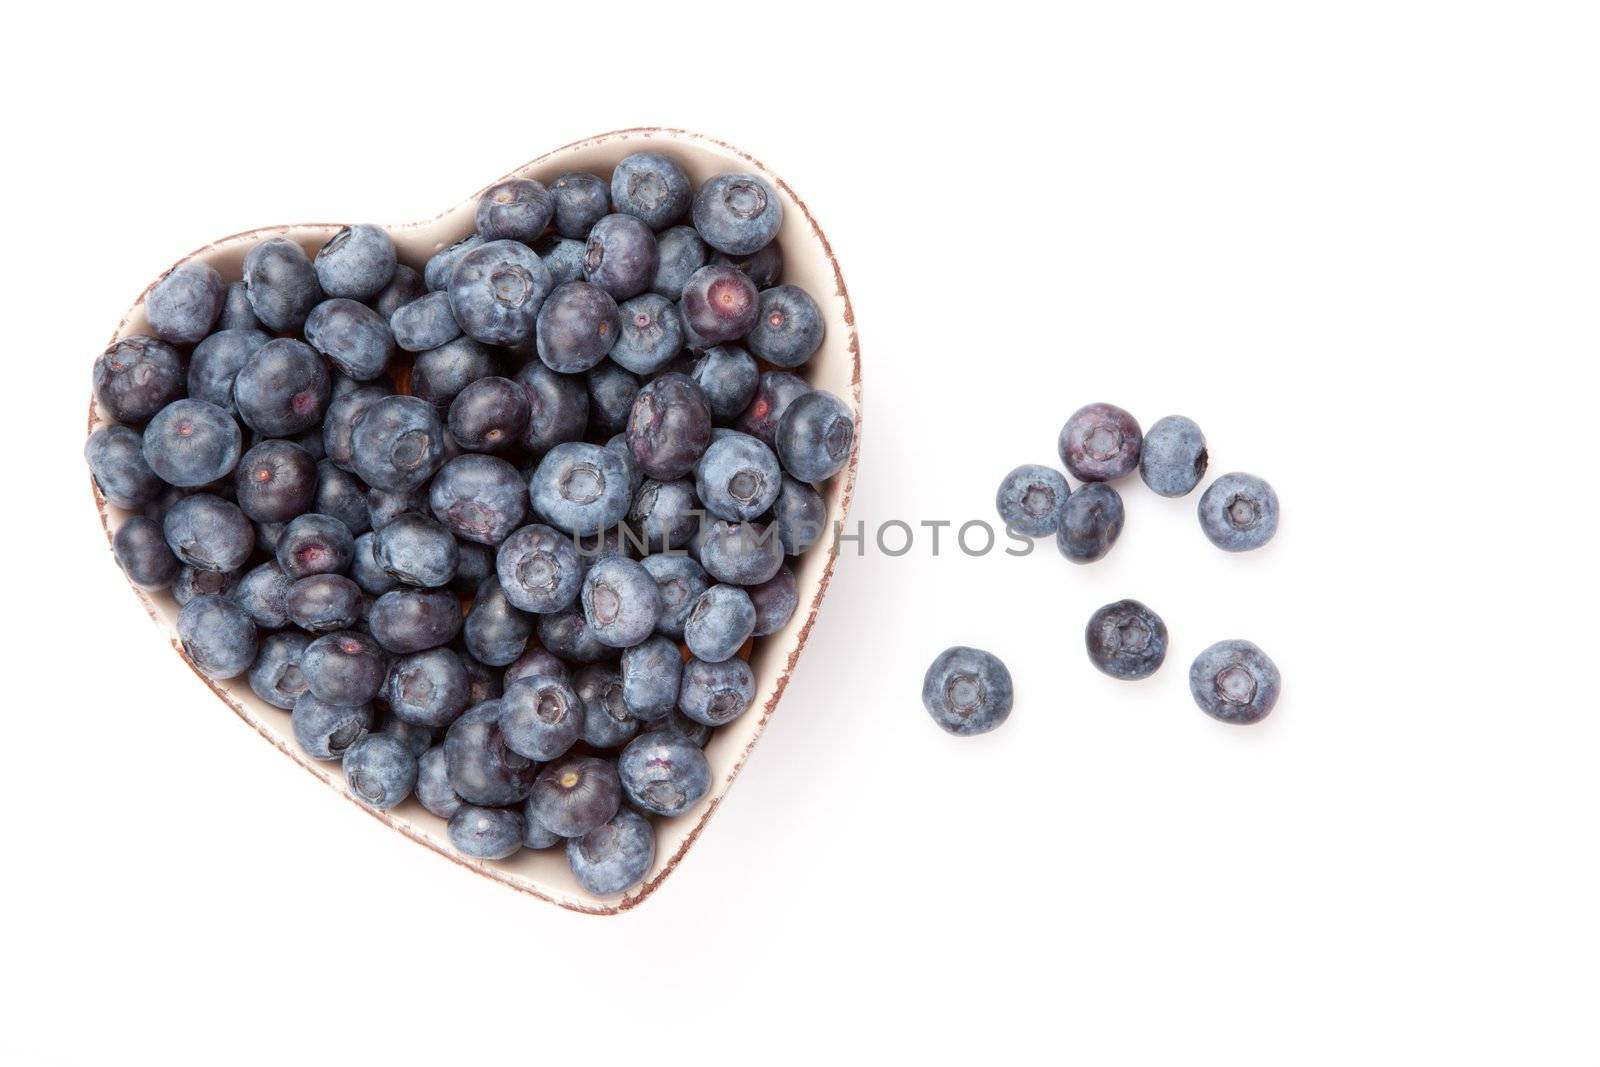 Fresh blueberries in a heart shaped bowl against a white background